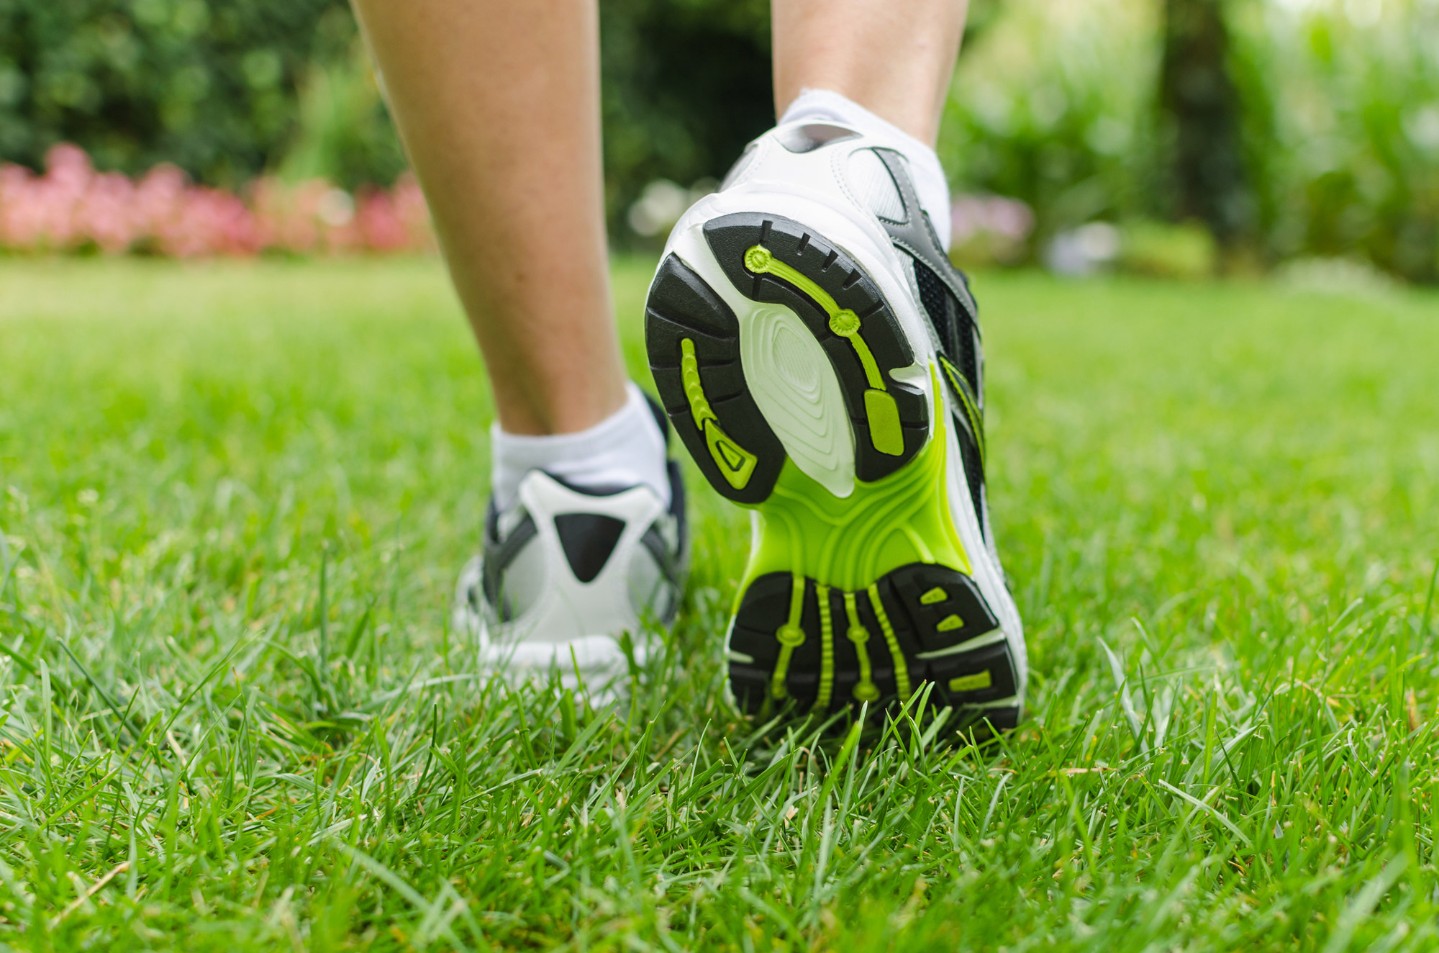 walking sneakers on grass||Woman Stretching with toe running shoes||